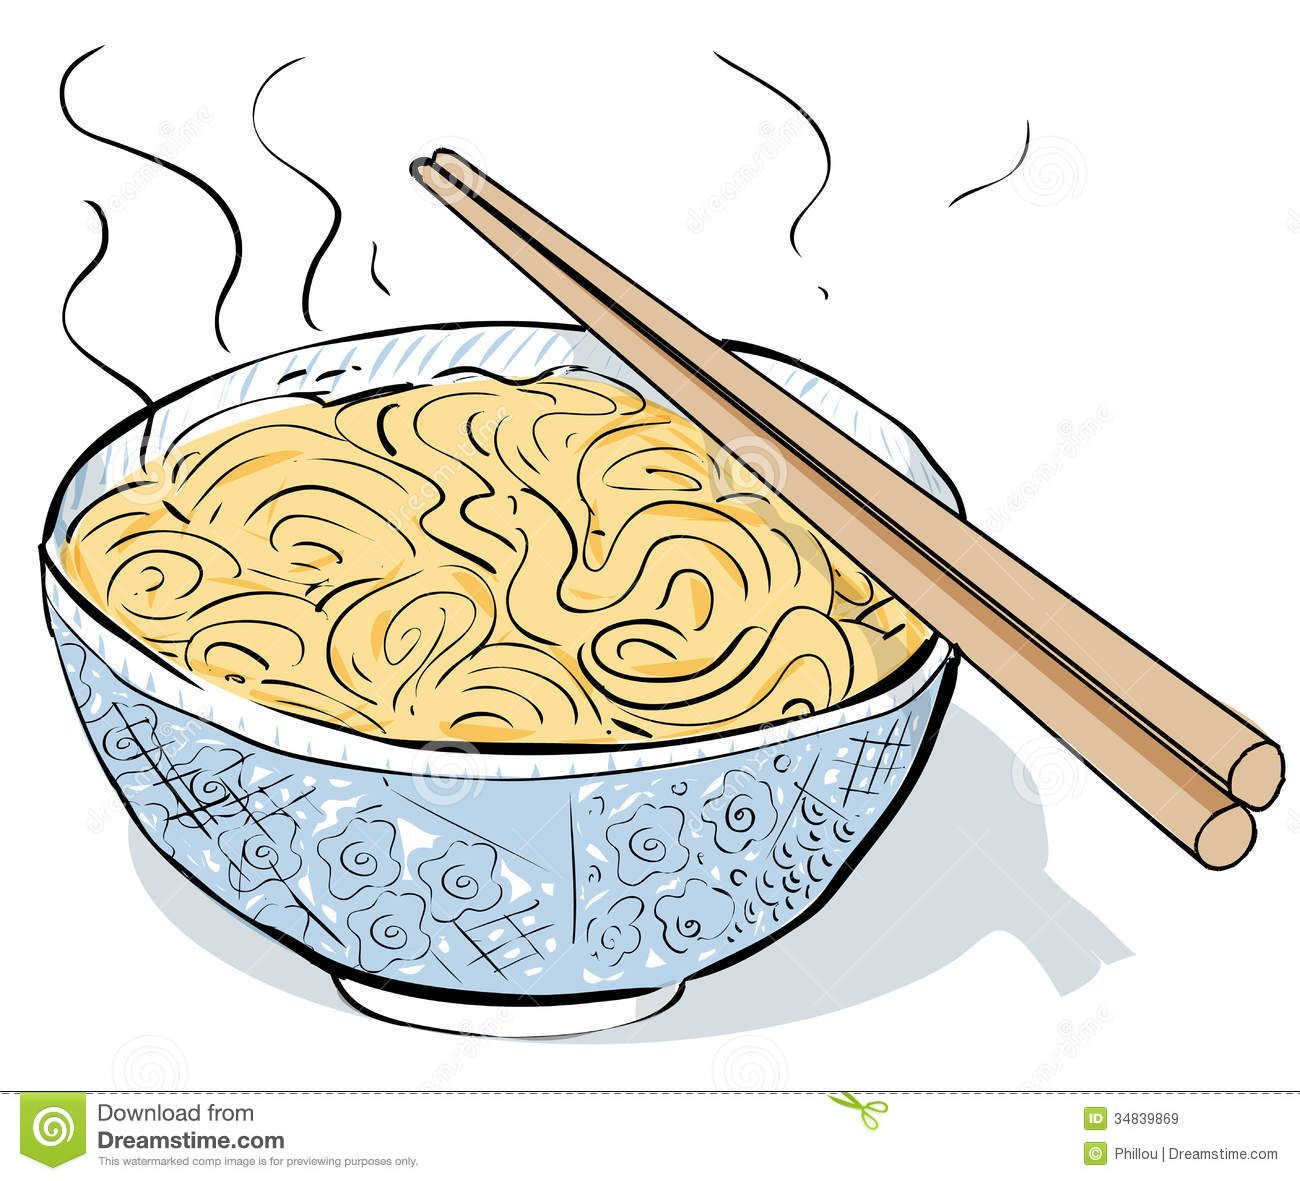 Noodle clipart free download on WebStockReview